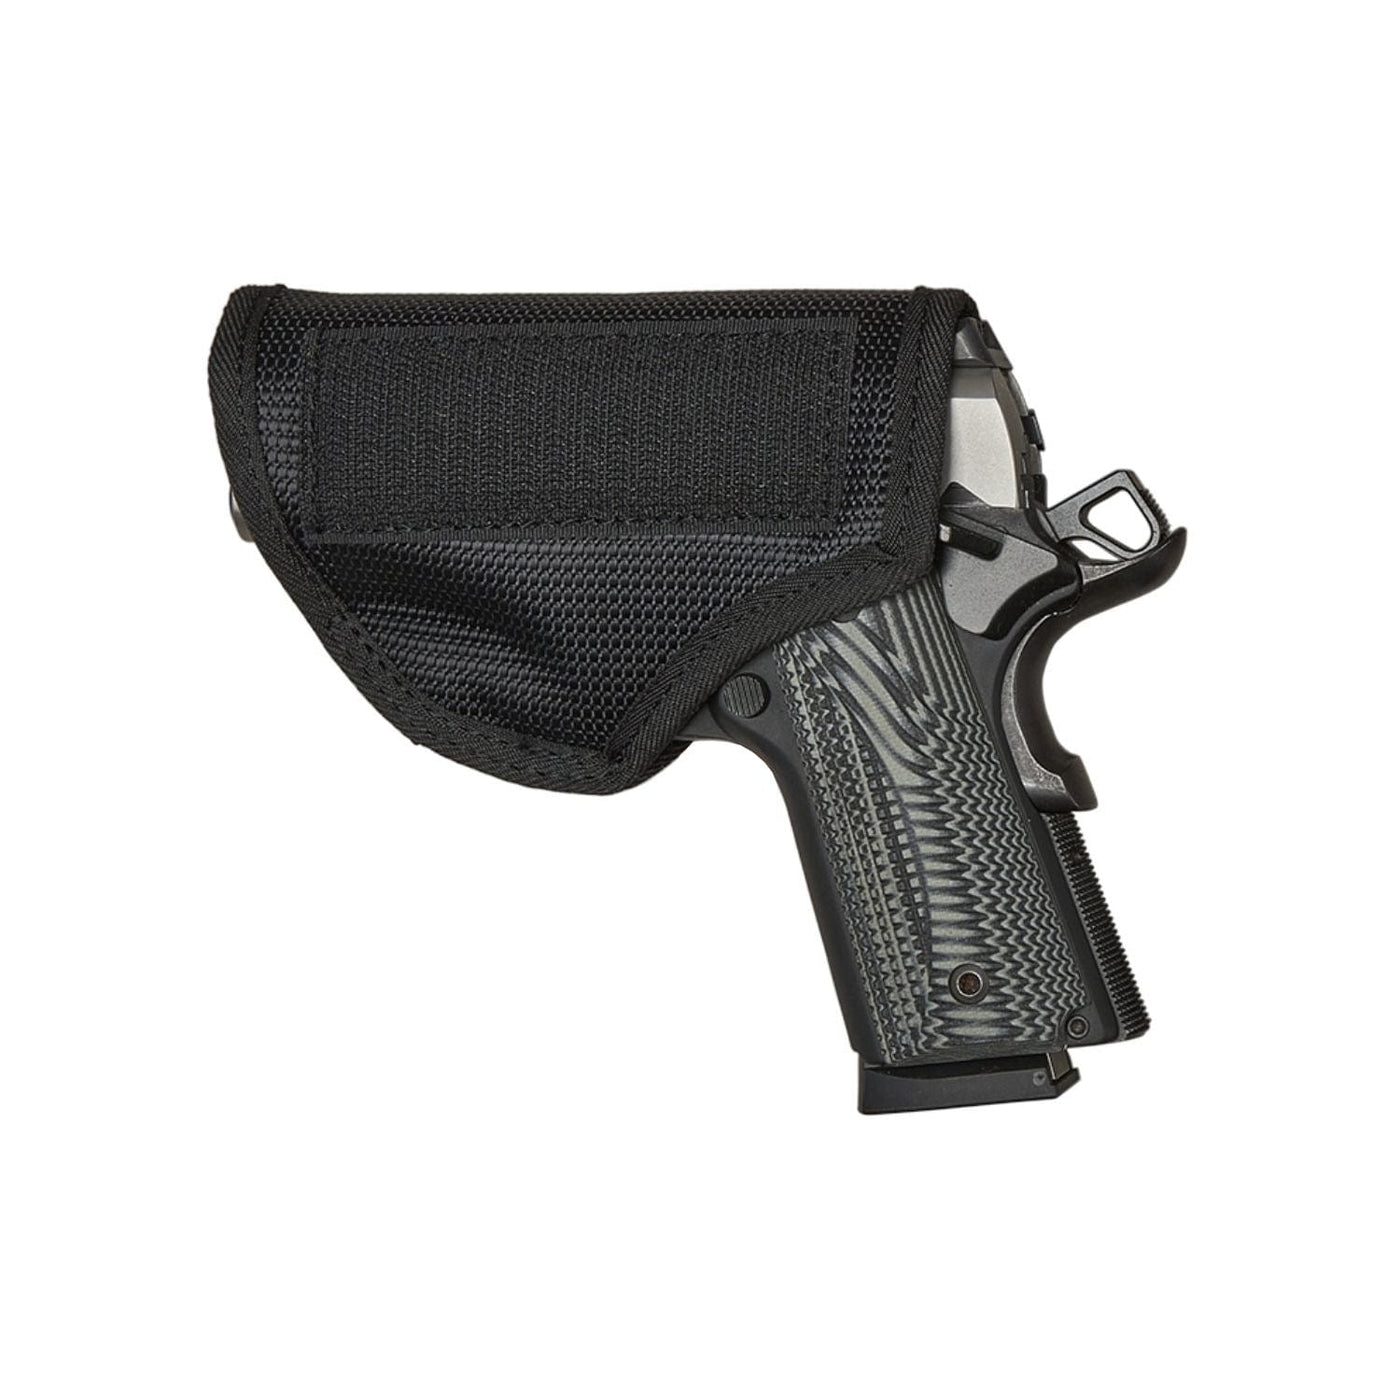 Concealed Carry Gun Holsters - Lady Conceal - Velcro Holster - Universal Holster sizes